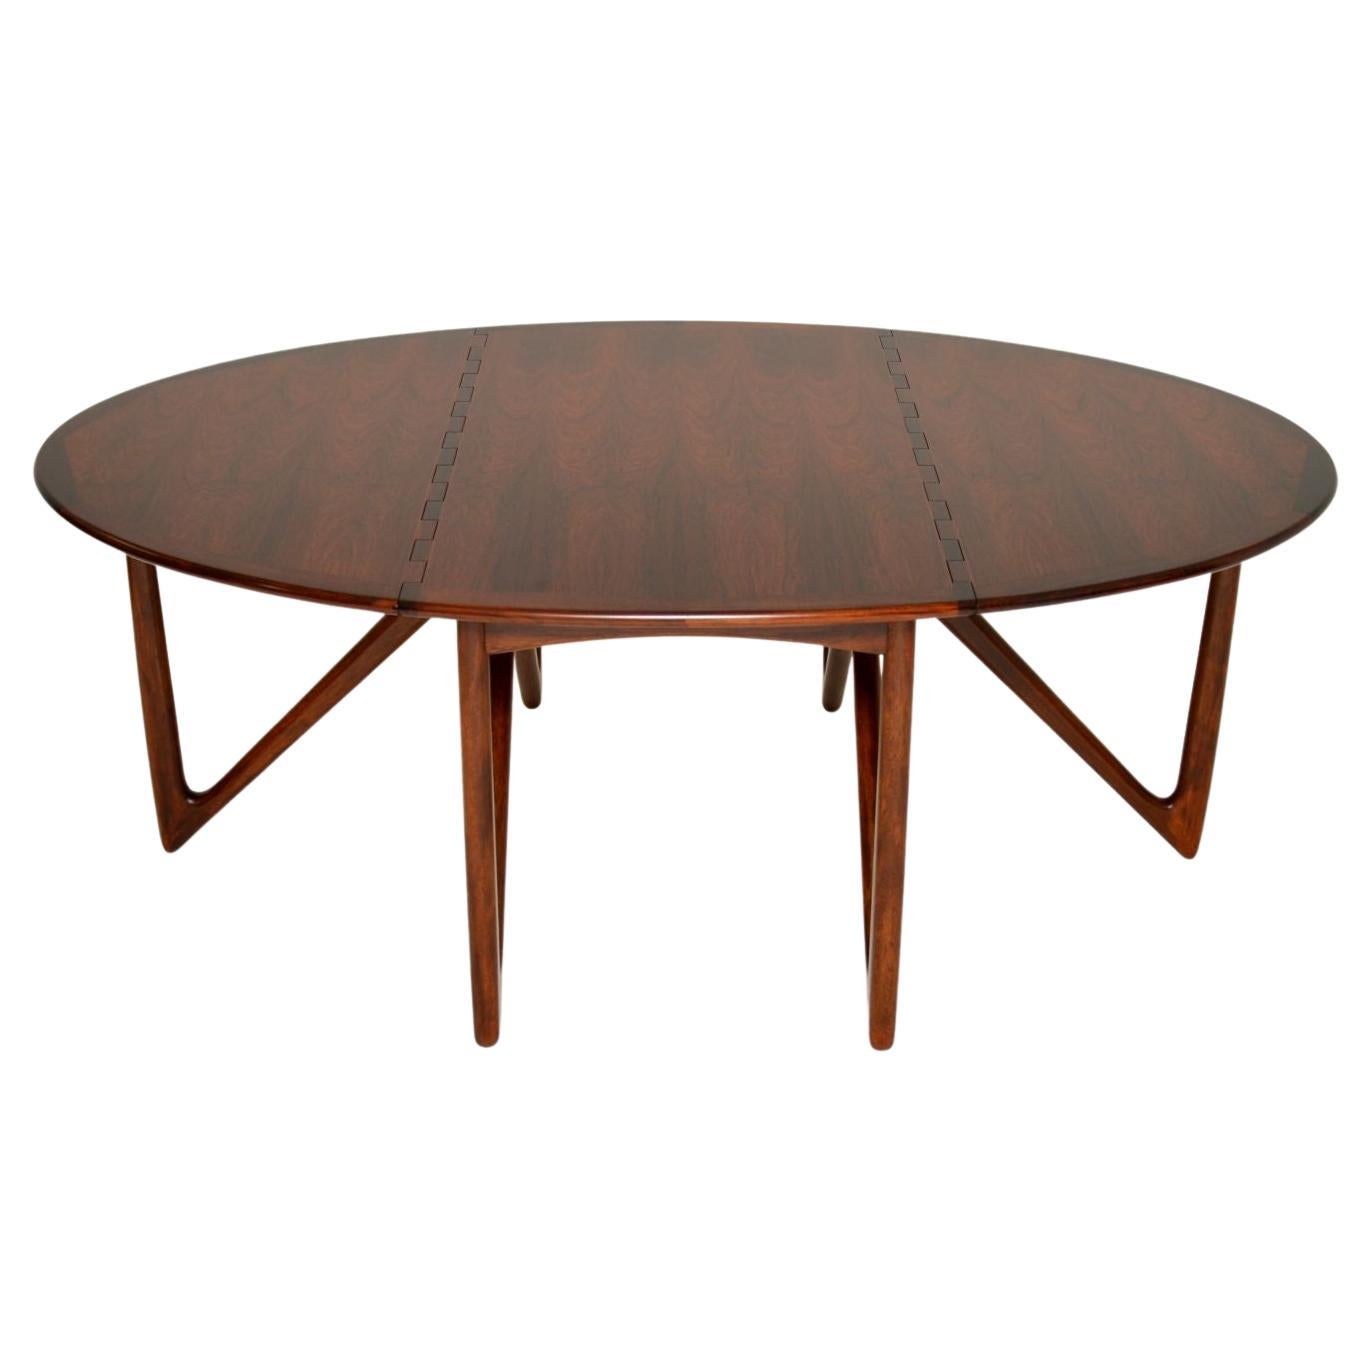 An absolutely magnificent Danish drop leaf dining table. This iconic design is by Niels Koefoed, made by Koefoeds Horslet in the 1960’s.

The quality is outstanding, the way the joints of the drop leaf top interlock is really thing of beauty. It is